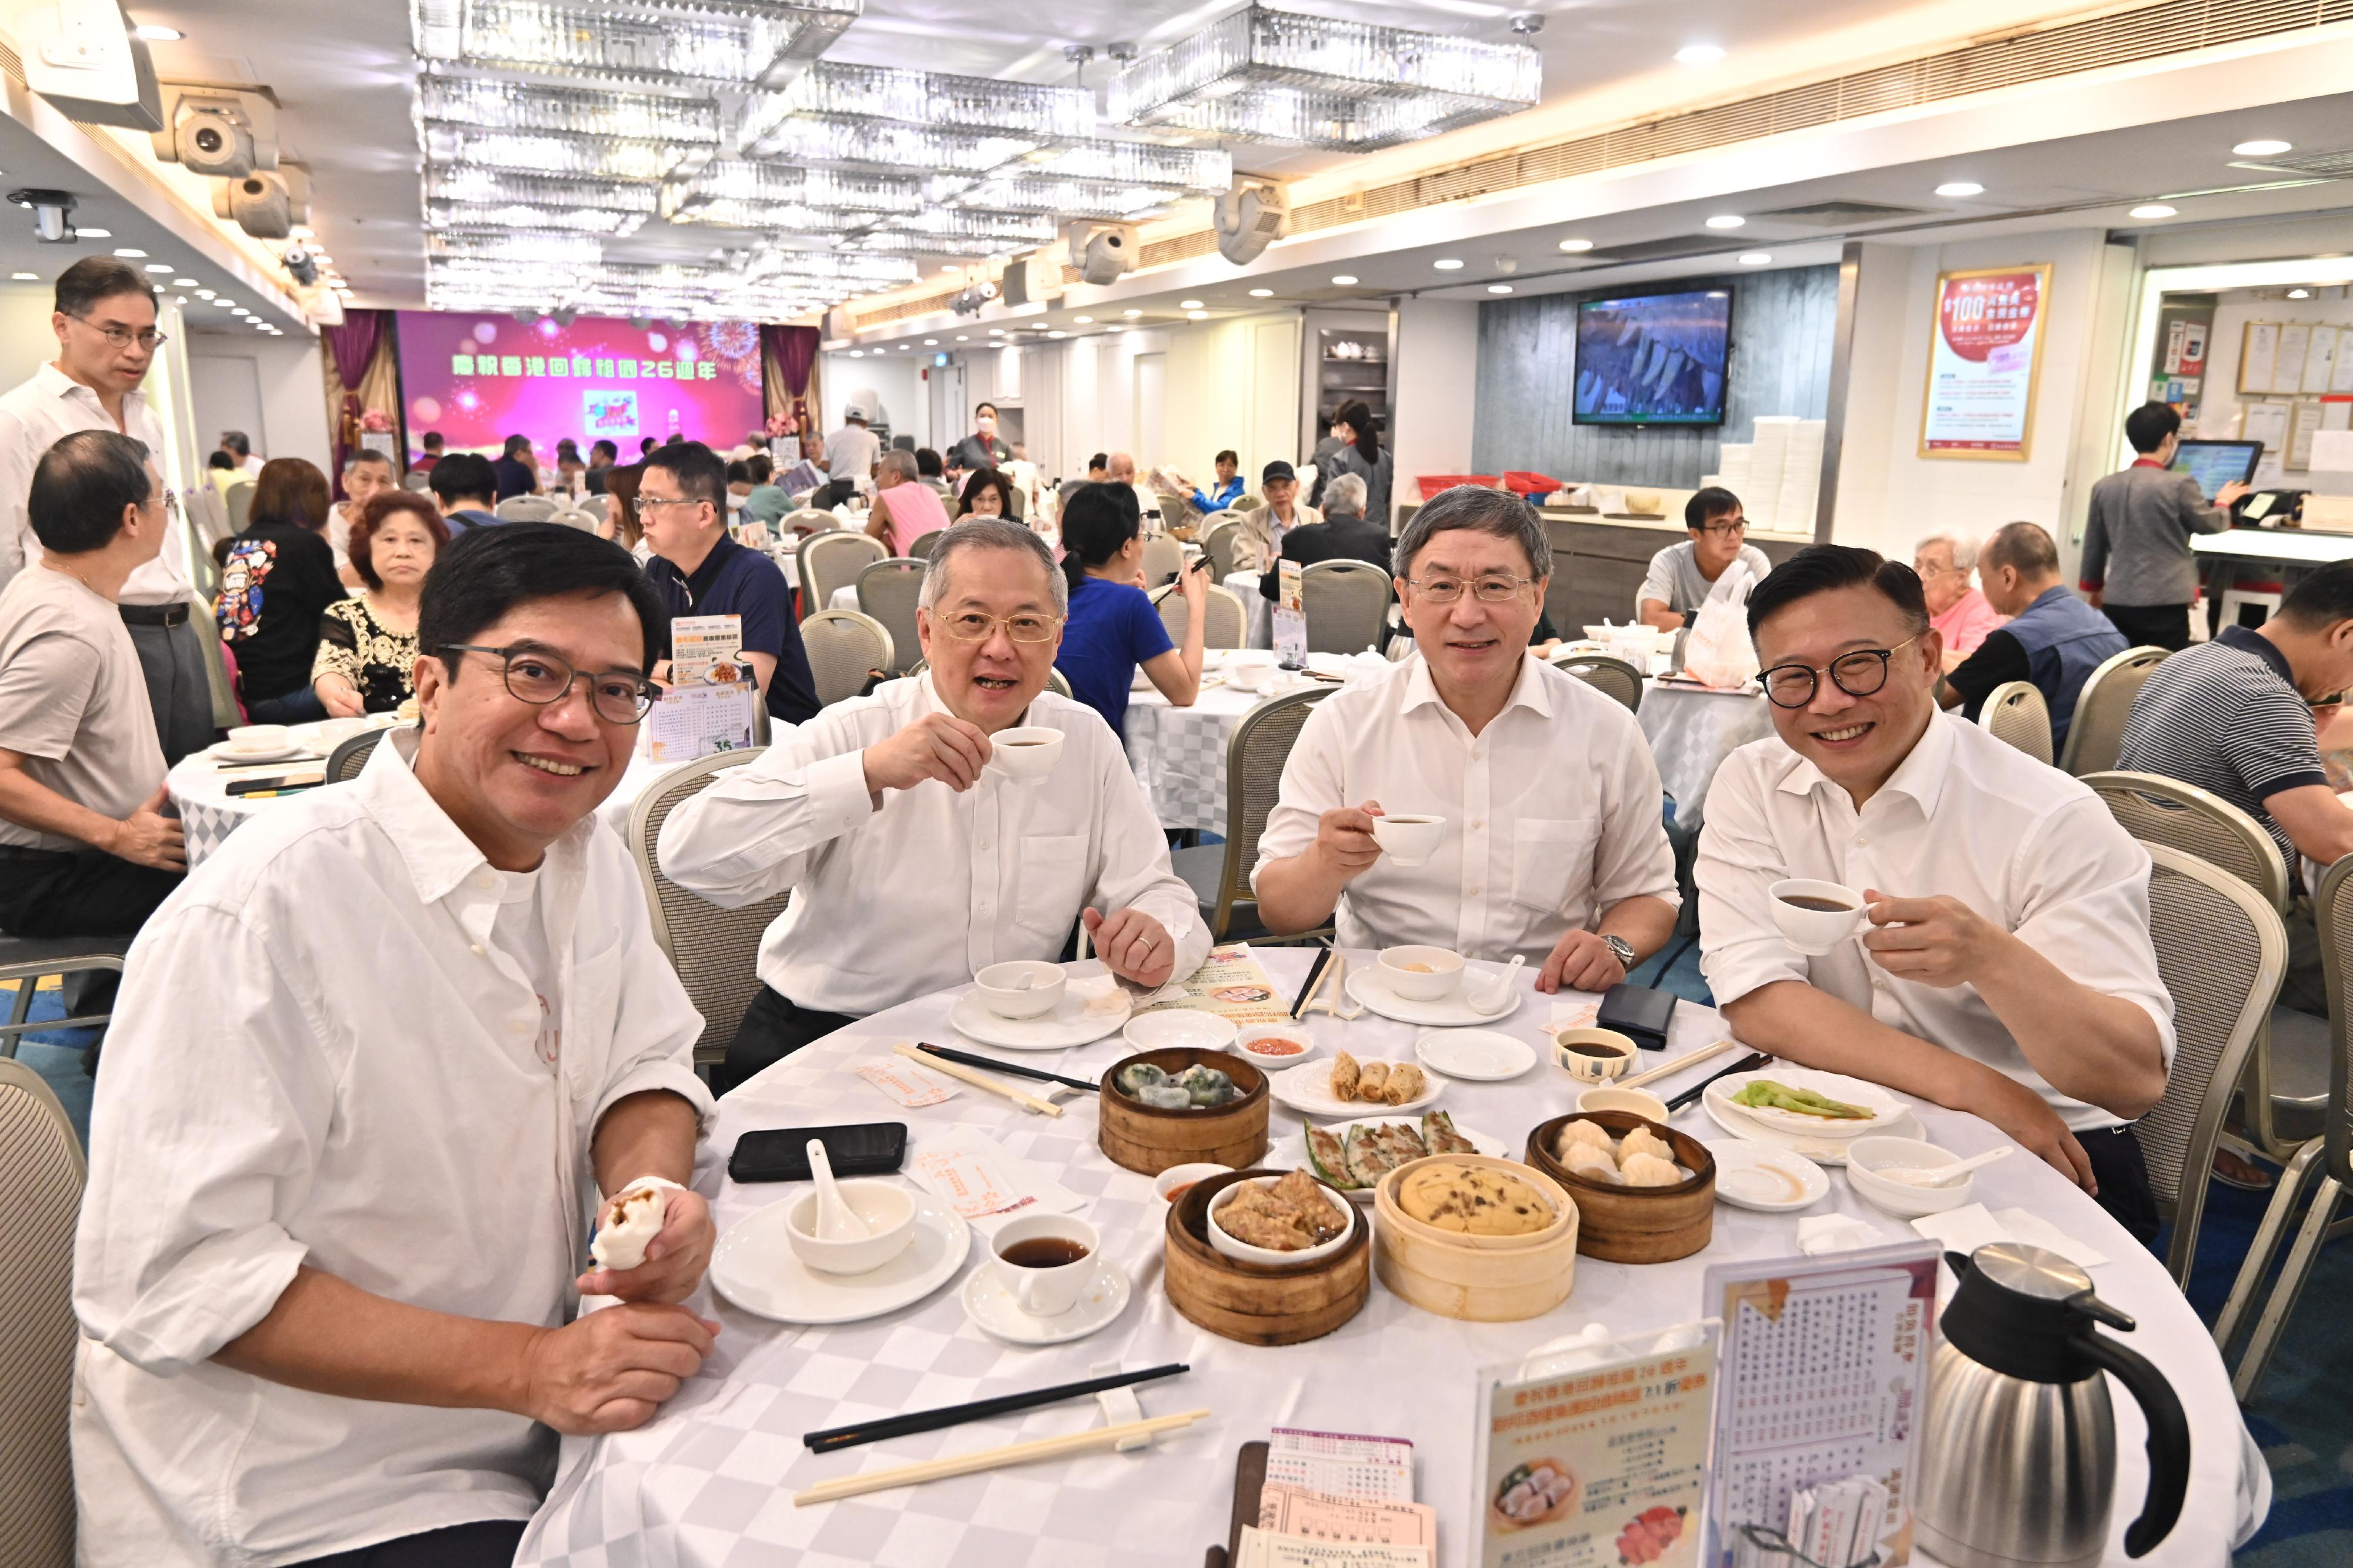 The Deputy Chief Secretary for Administration, Mr Cheuk Wing-hing (second right); the Deputy Financial Secretary, Mr Michael Wong (first left); and the Deputy Secretary for Justice, Mr Cheung Kwok-kwan (first right),  together with the Legislative Council Member (Catering), Mr Tommy Cheung (second left), enjoy dim sum at a North Point restaurant today (July 1) to celebrate Hong Kong's return to the motherland.